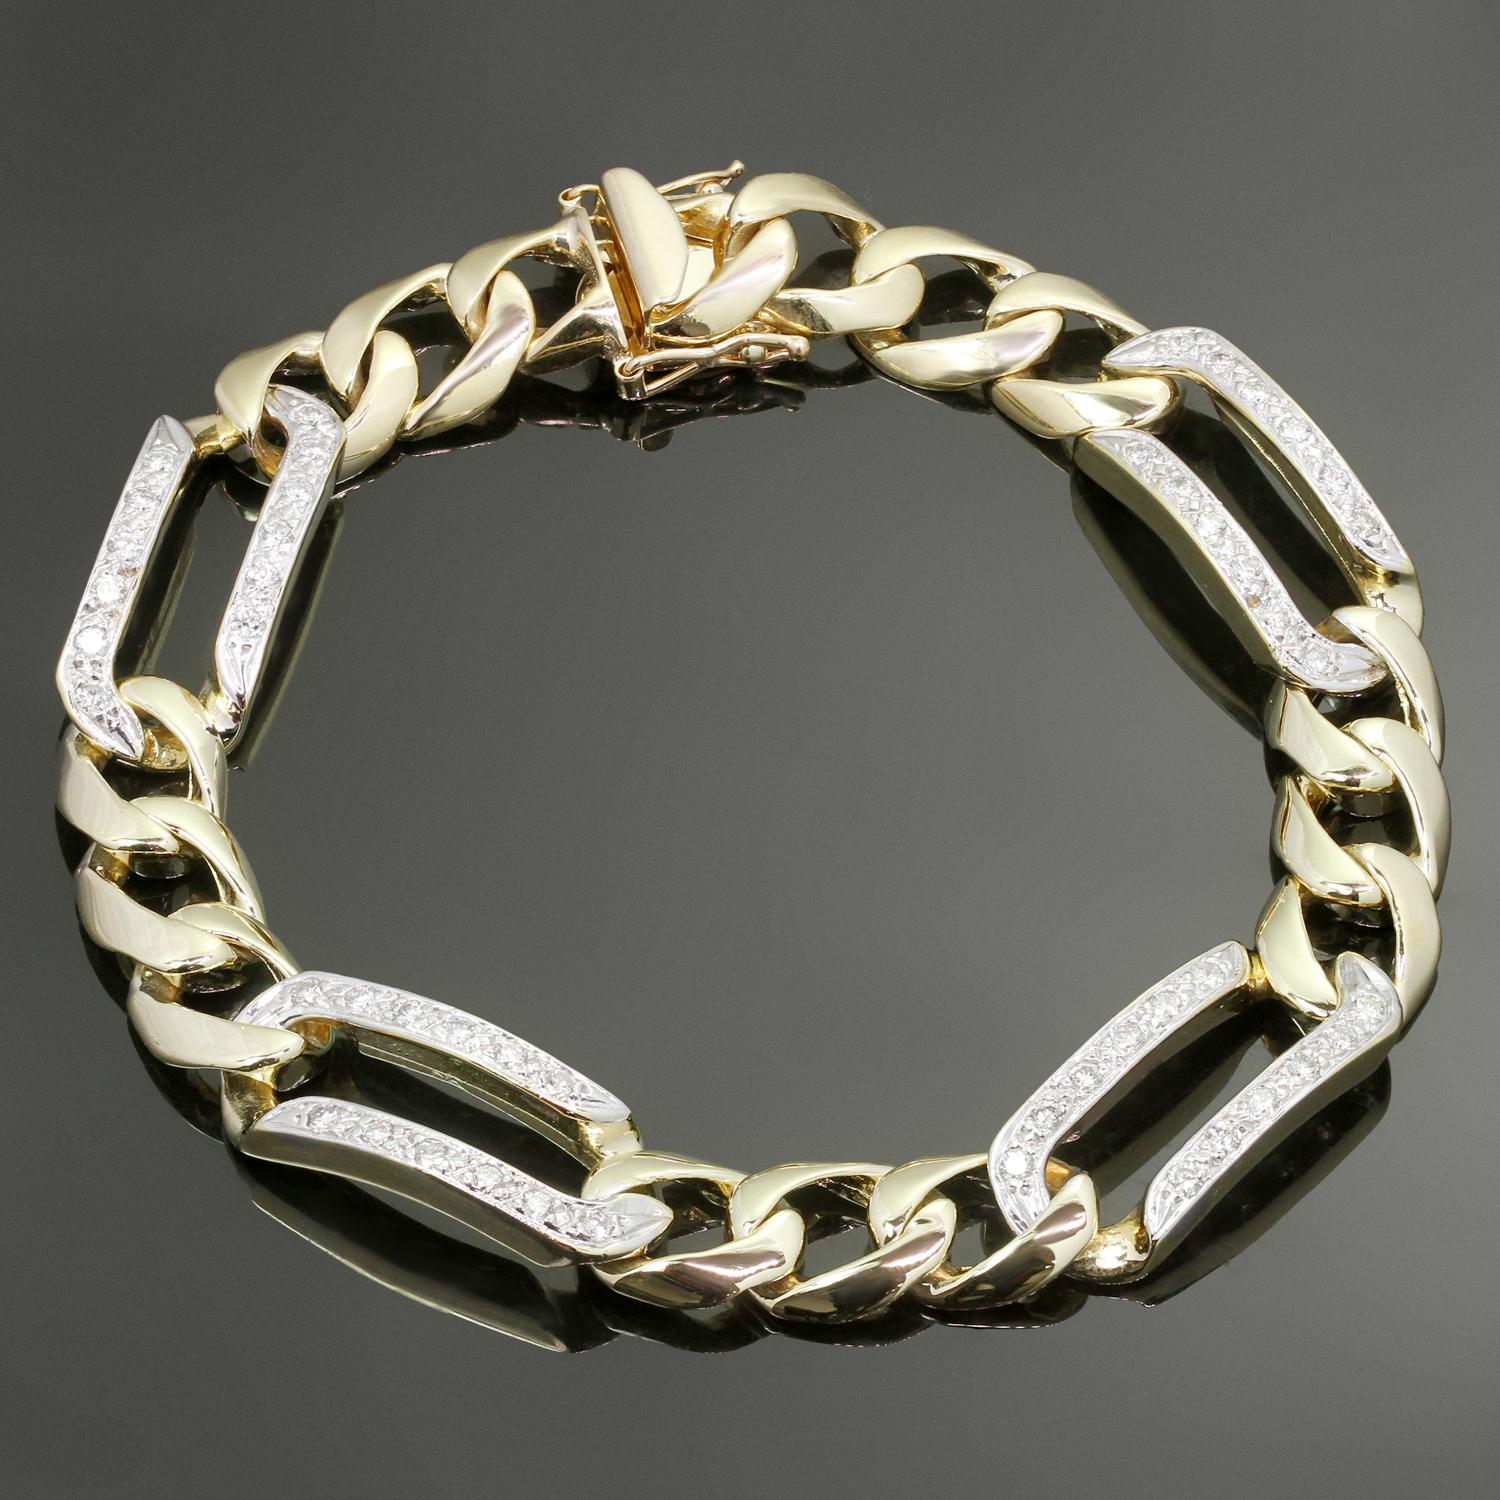 This classic men's link bracelet is crafted in 14k yellow gold and set with brilliant-cut round H VS2-SI1 diamonds of an estimated 1.50 carats. Made in United States circa 1990s. Measurements: 0.43